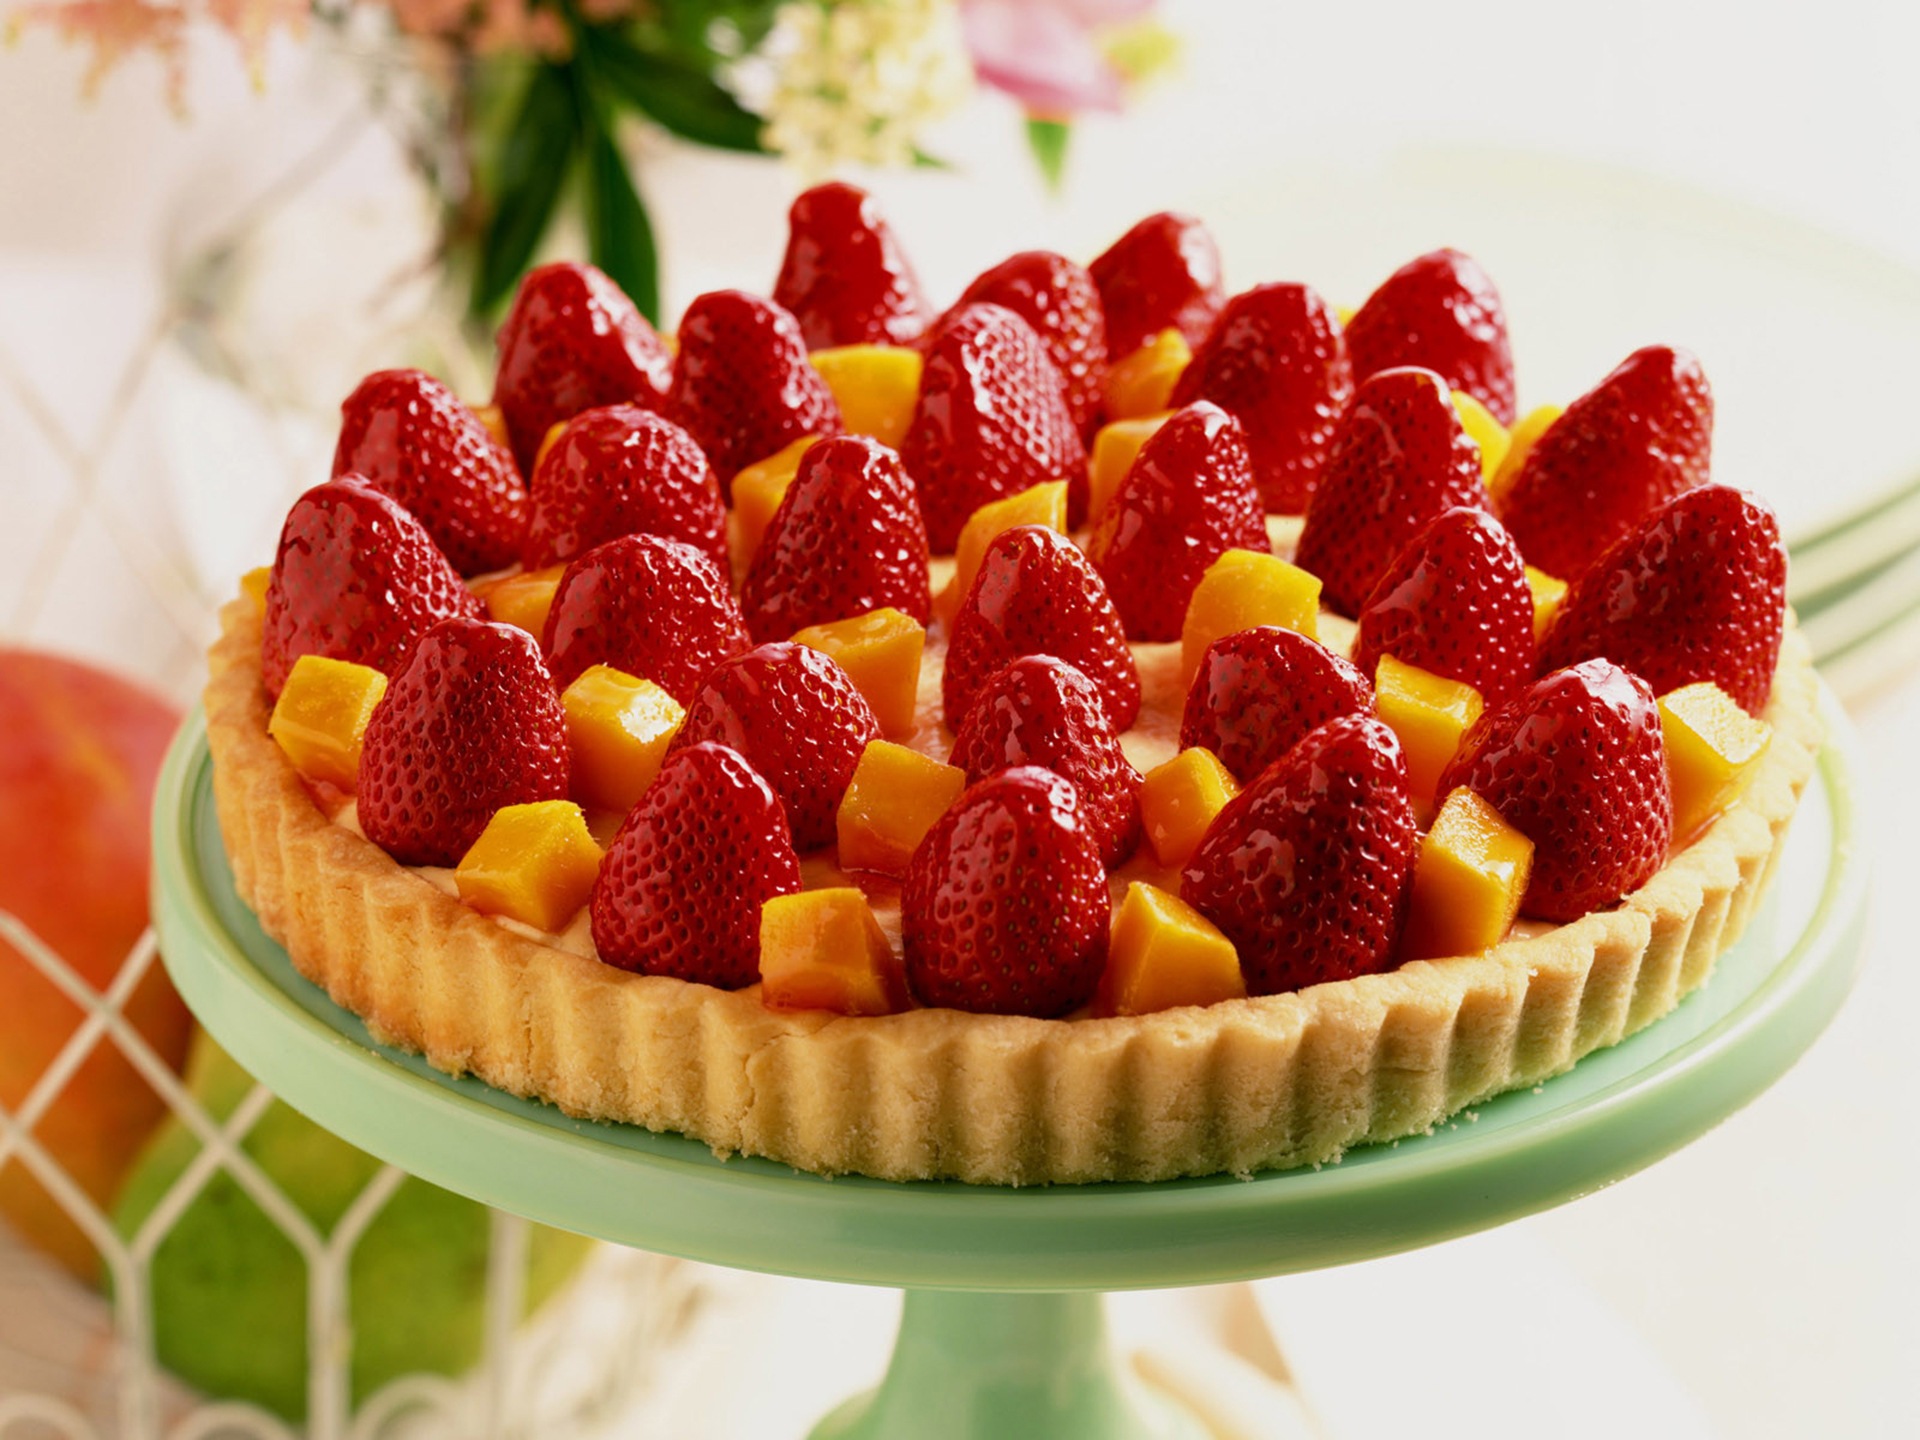 Delicious strawberry cake HD wallpapers #22 - 1920x1440